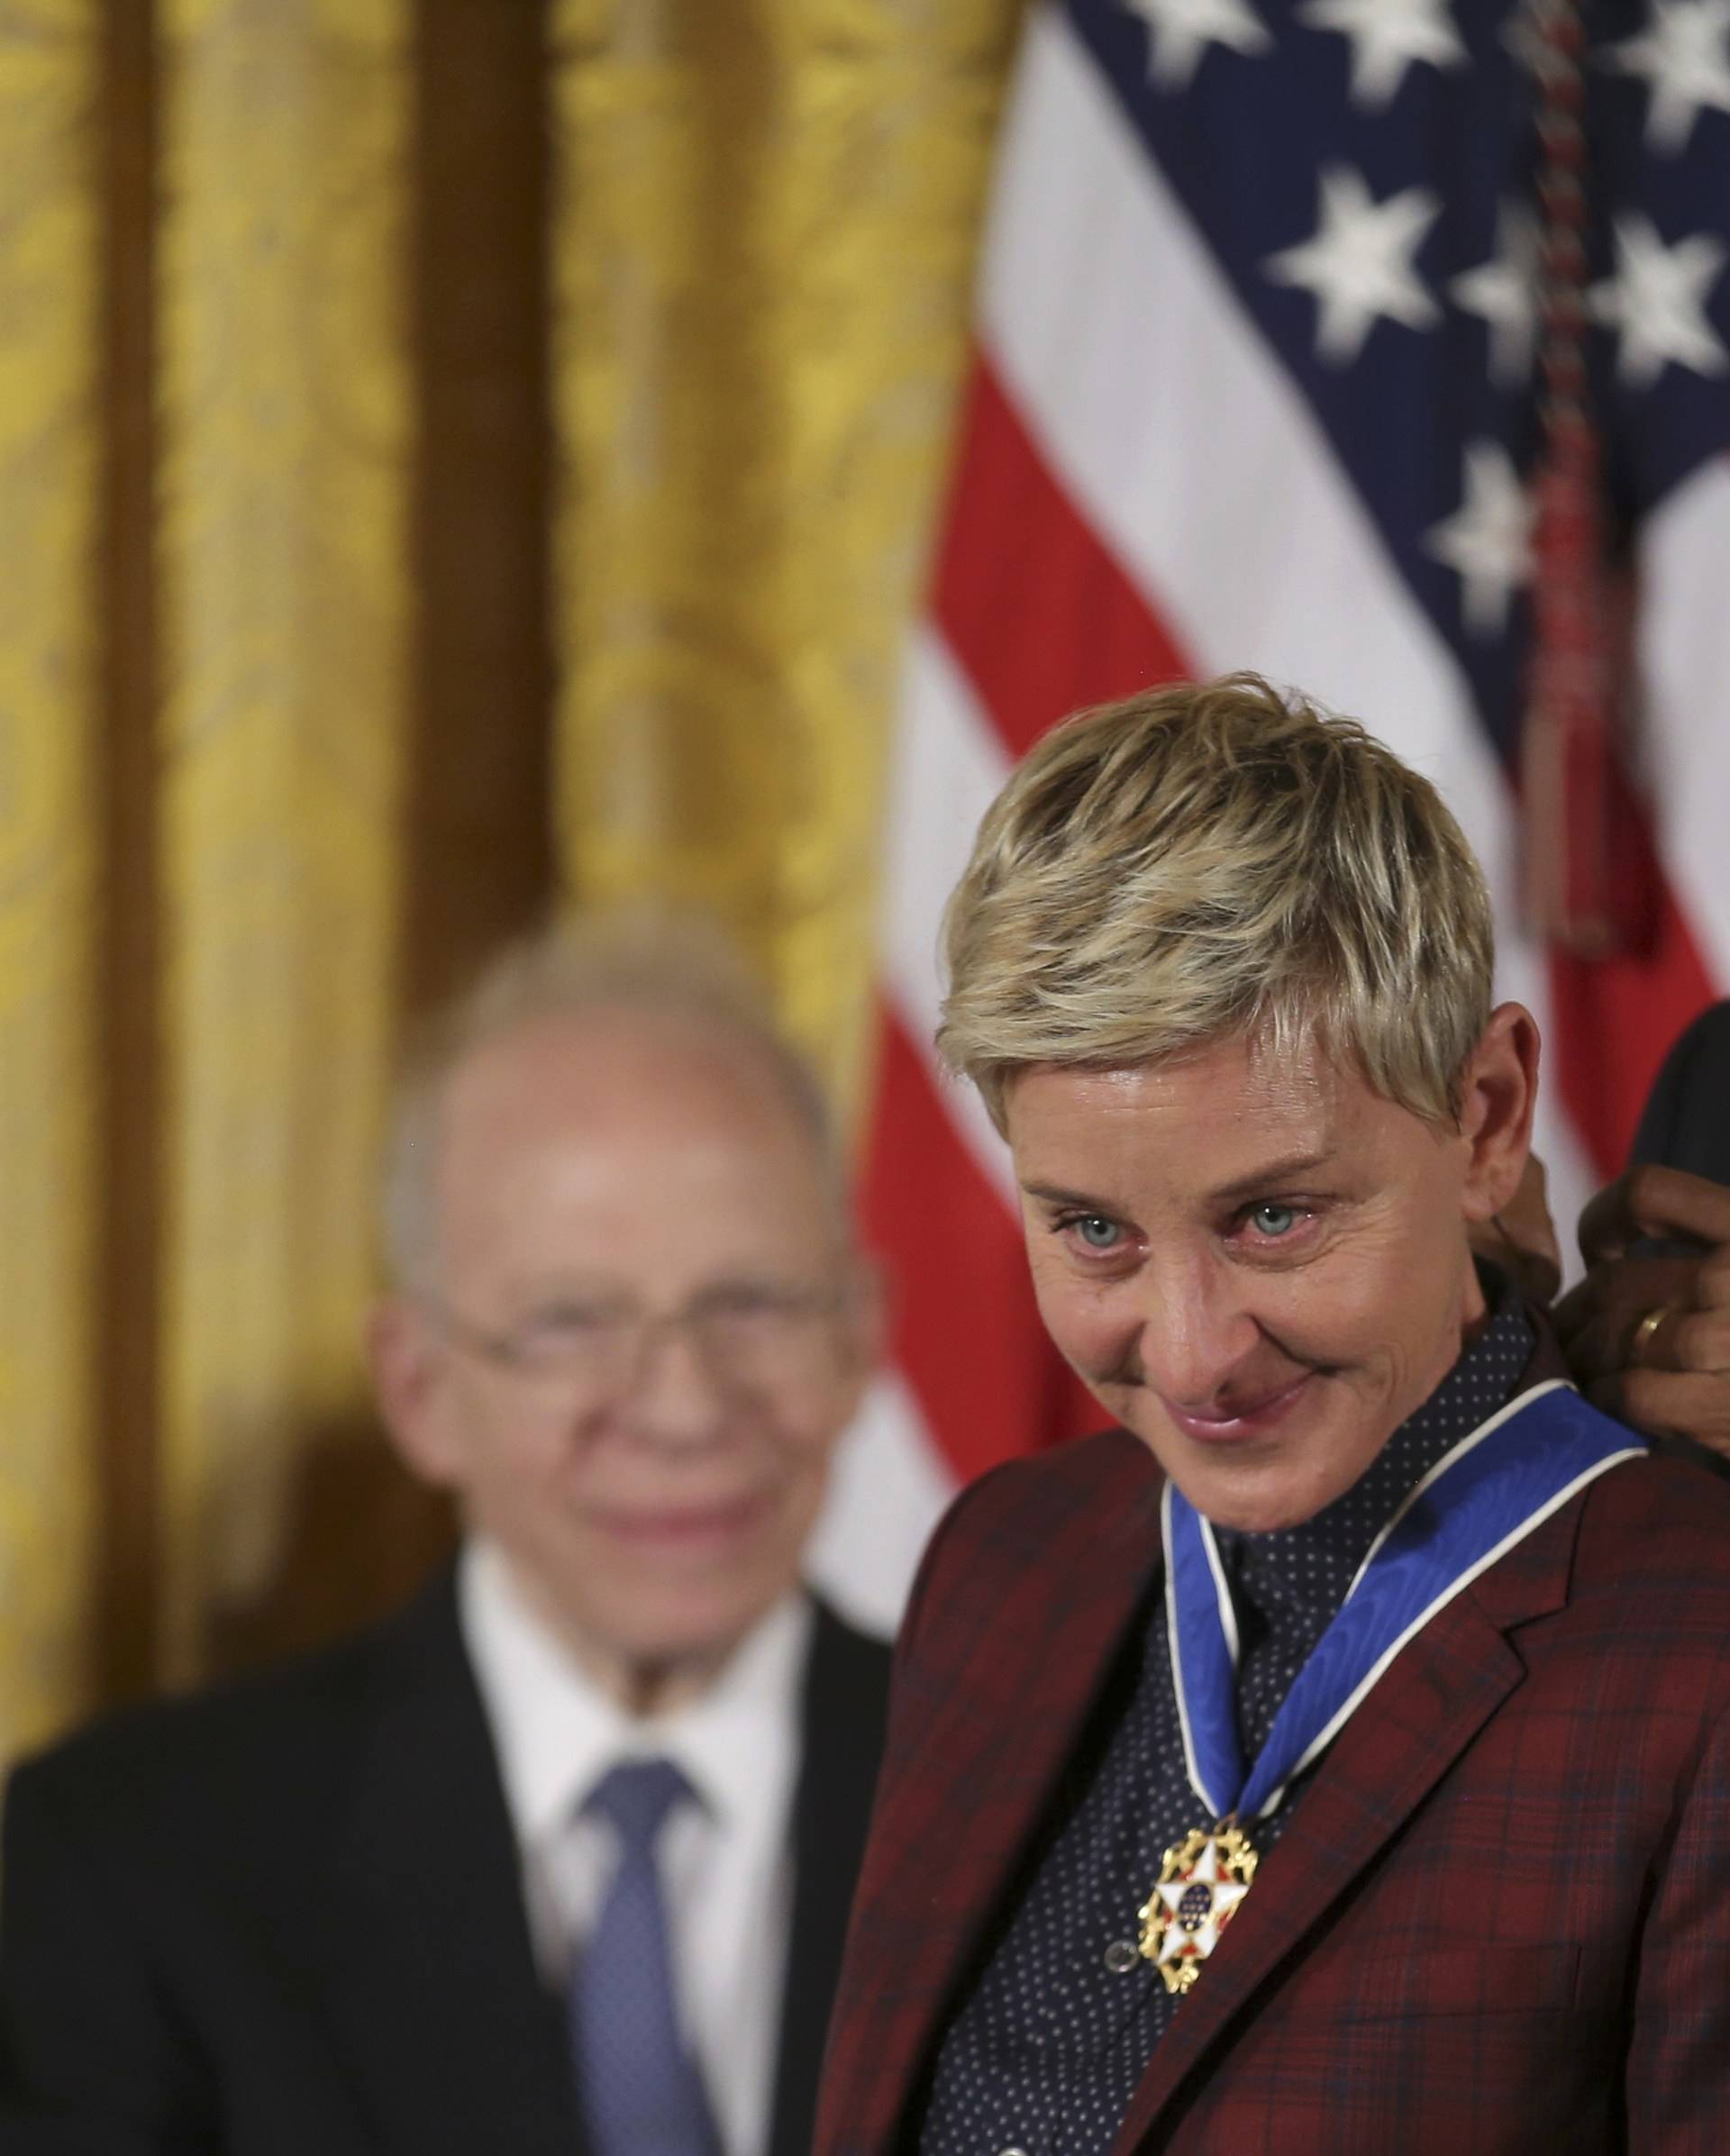 U.S.  President Obama presents the Presidential Medal of Freedom to DeGeneres during ceremony at the White House in Washington